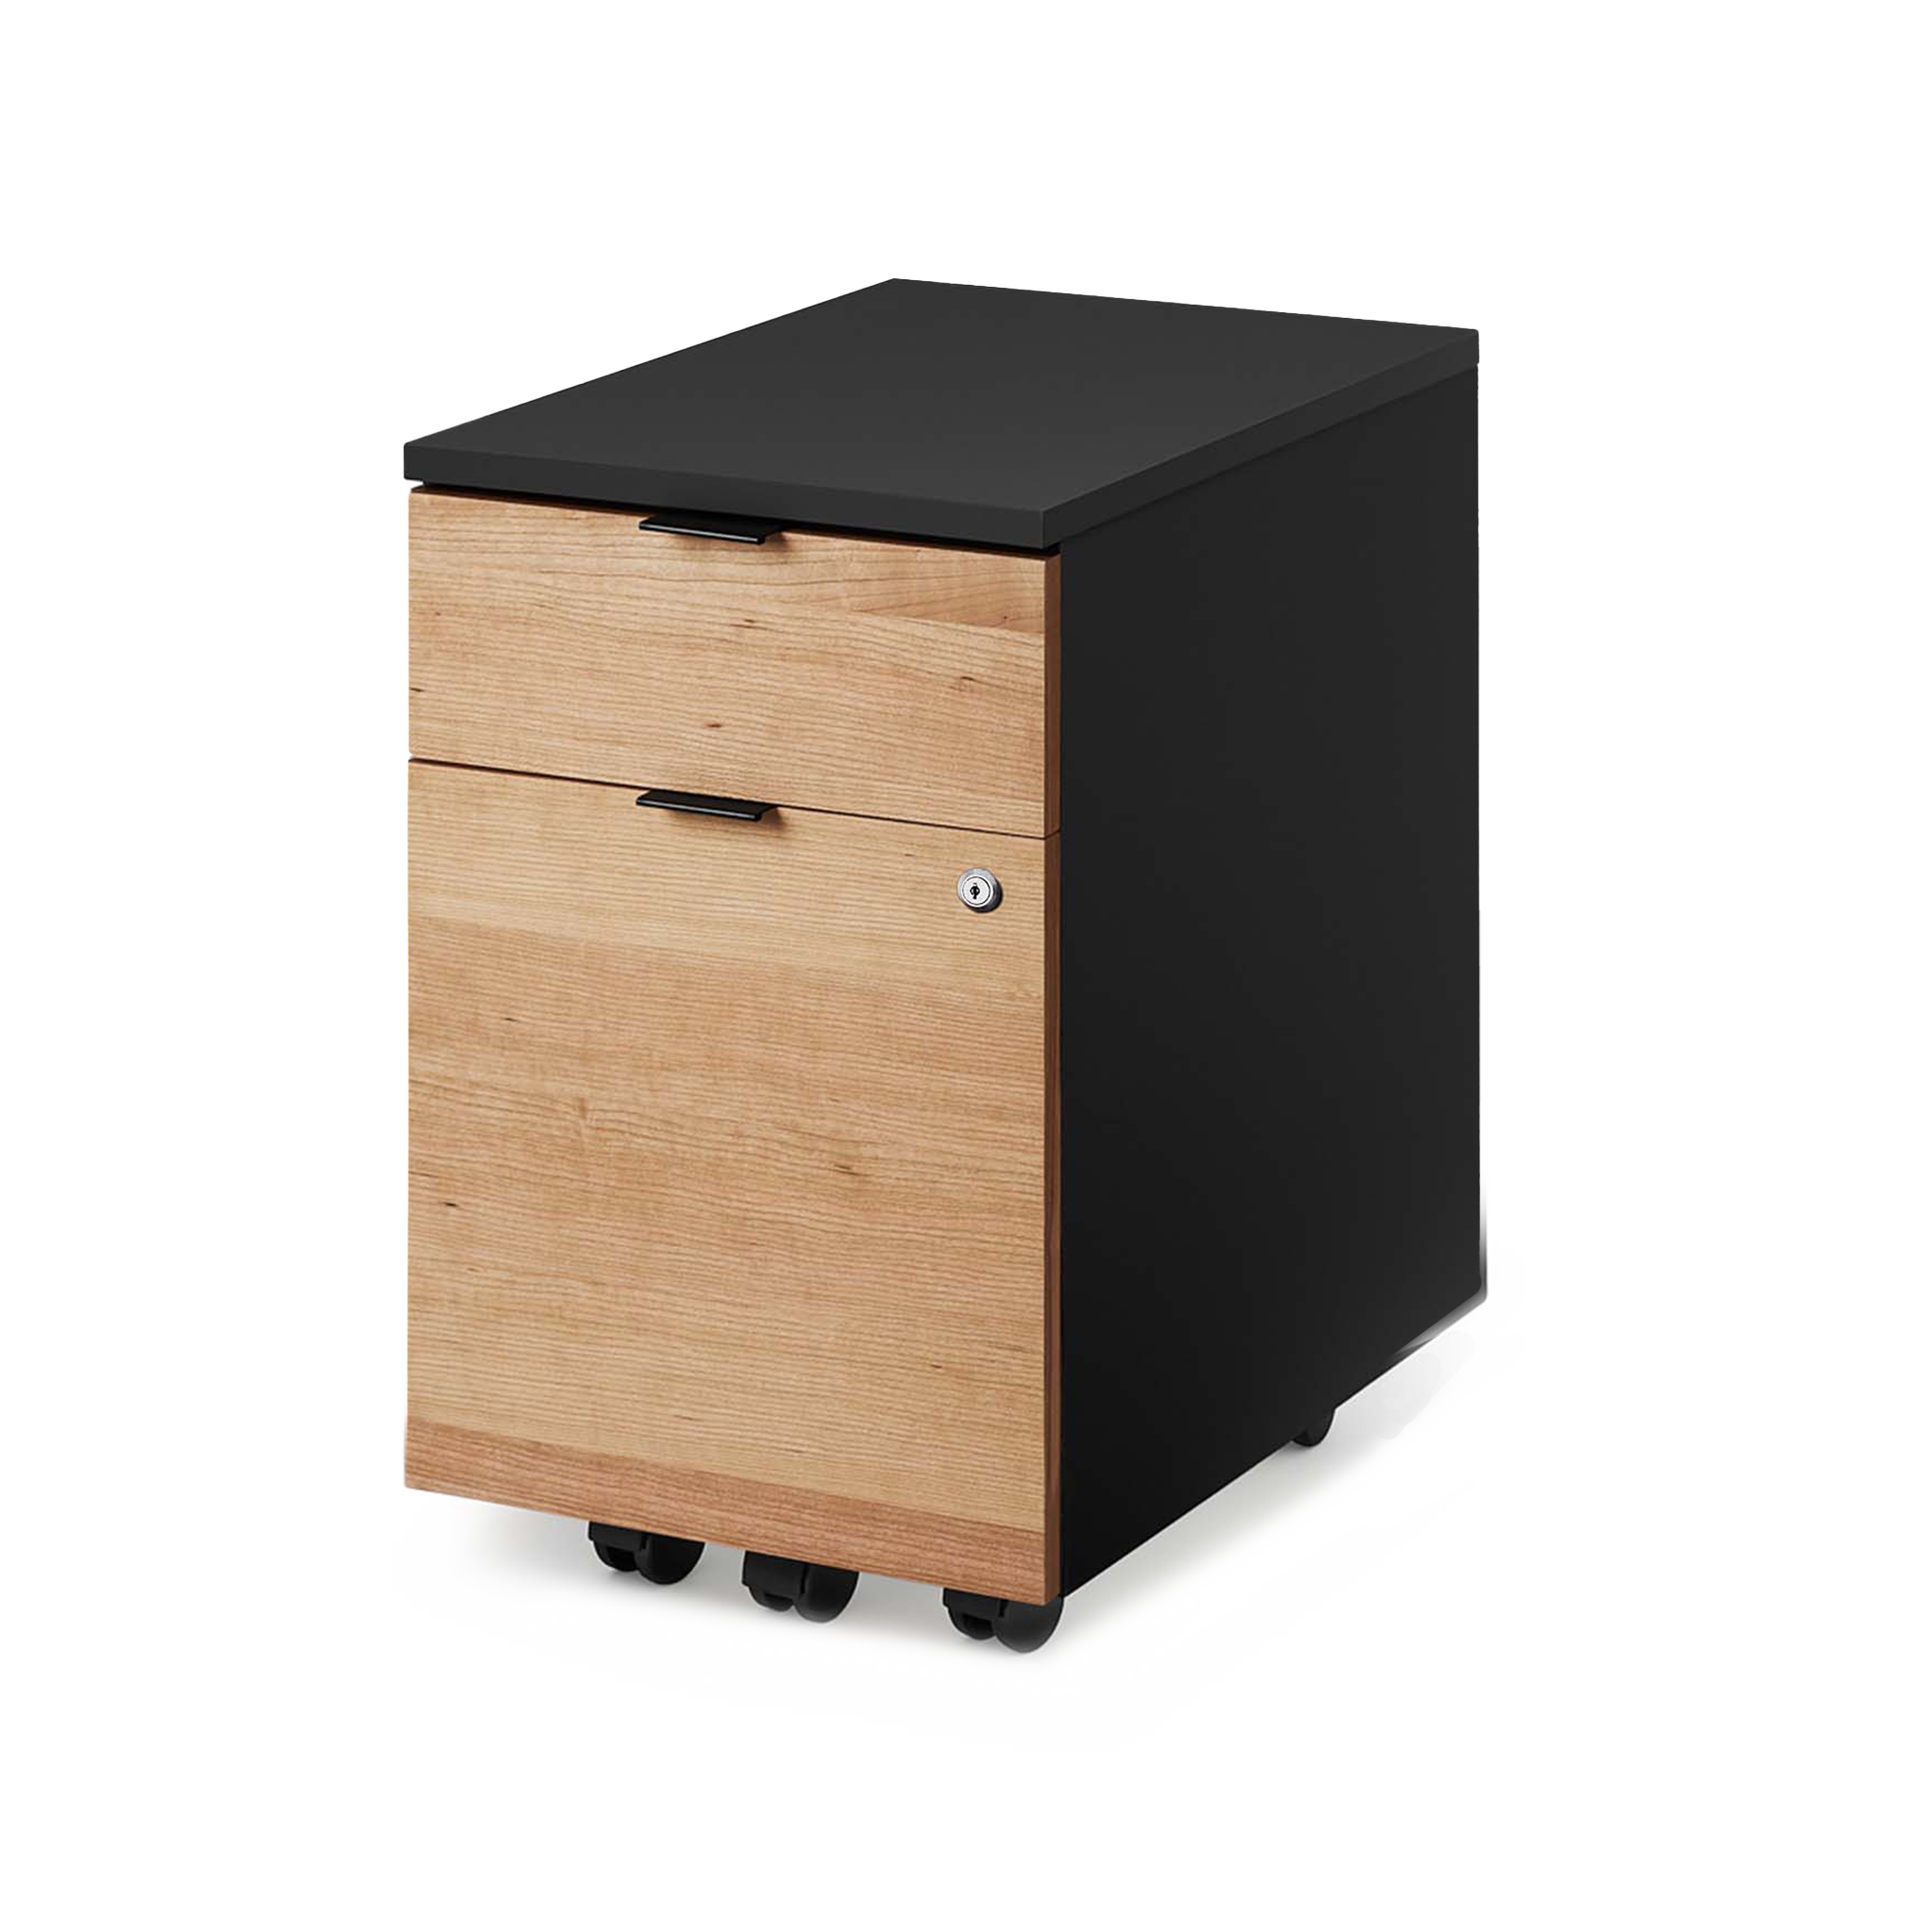 Almost Perfect Neat Filing Cabinet - Black-Cherrywood - Noir-Cherrywood